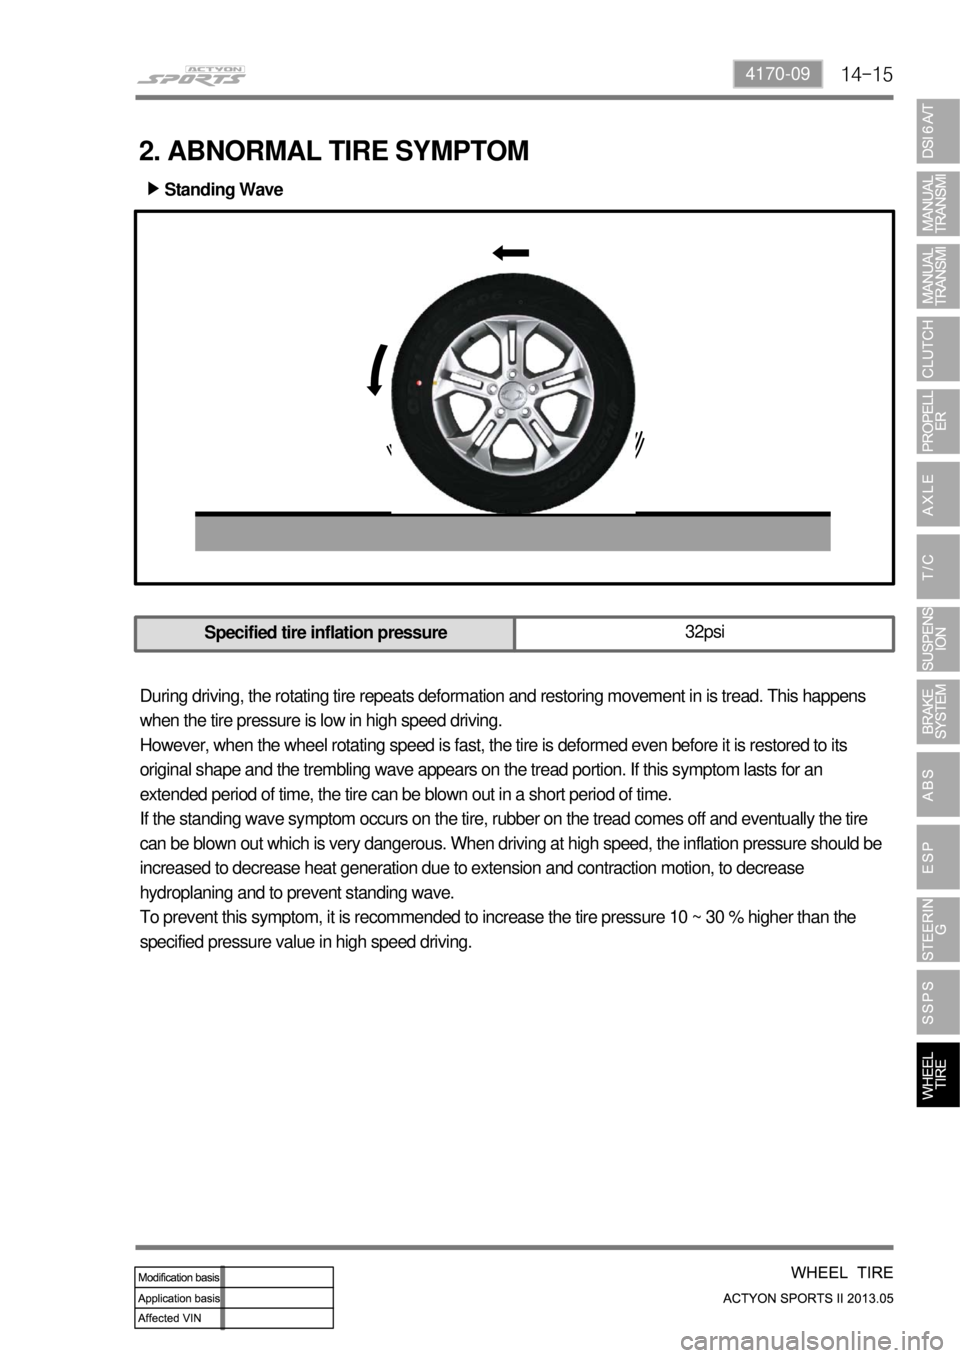 SSANGYONG NEW ACTYON SPORTS 2013  Service Manual 14-154170-09
During driving, the rotating tire repeats deformation and restoring movement in is tread. This happens 
when the tire pressure is low in high speed driving. 
However, when the wheel rotat